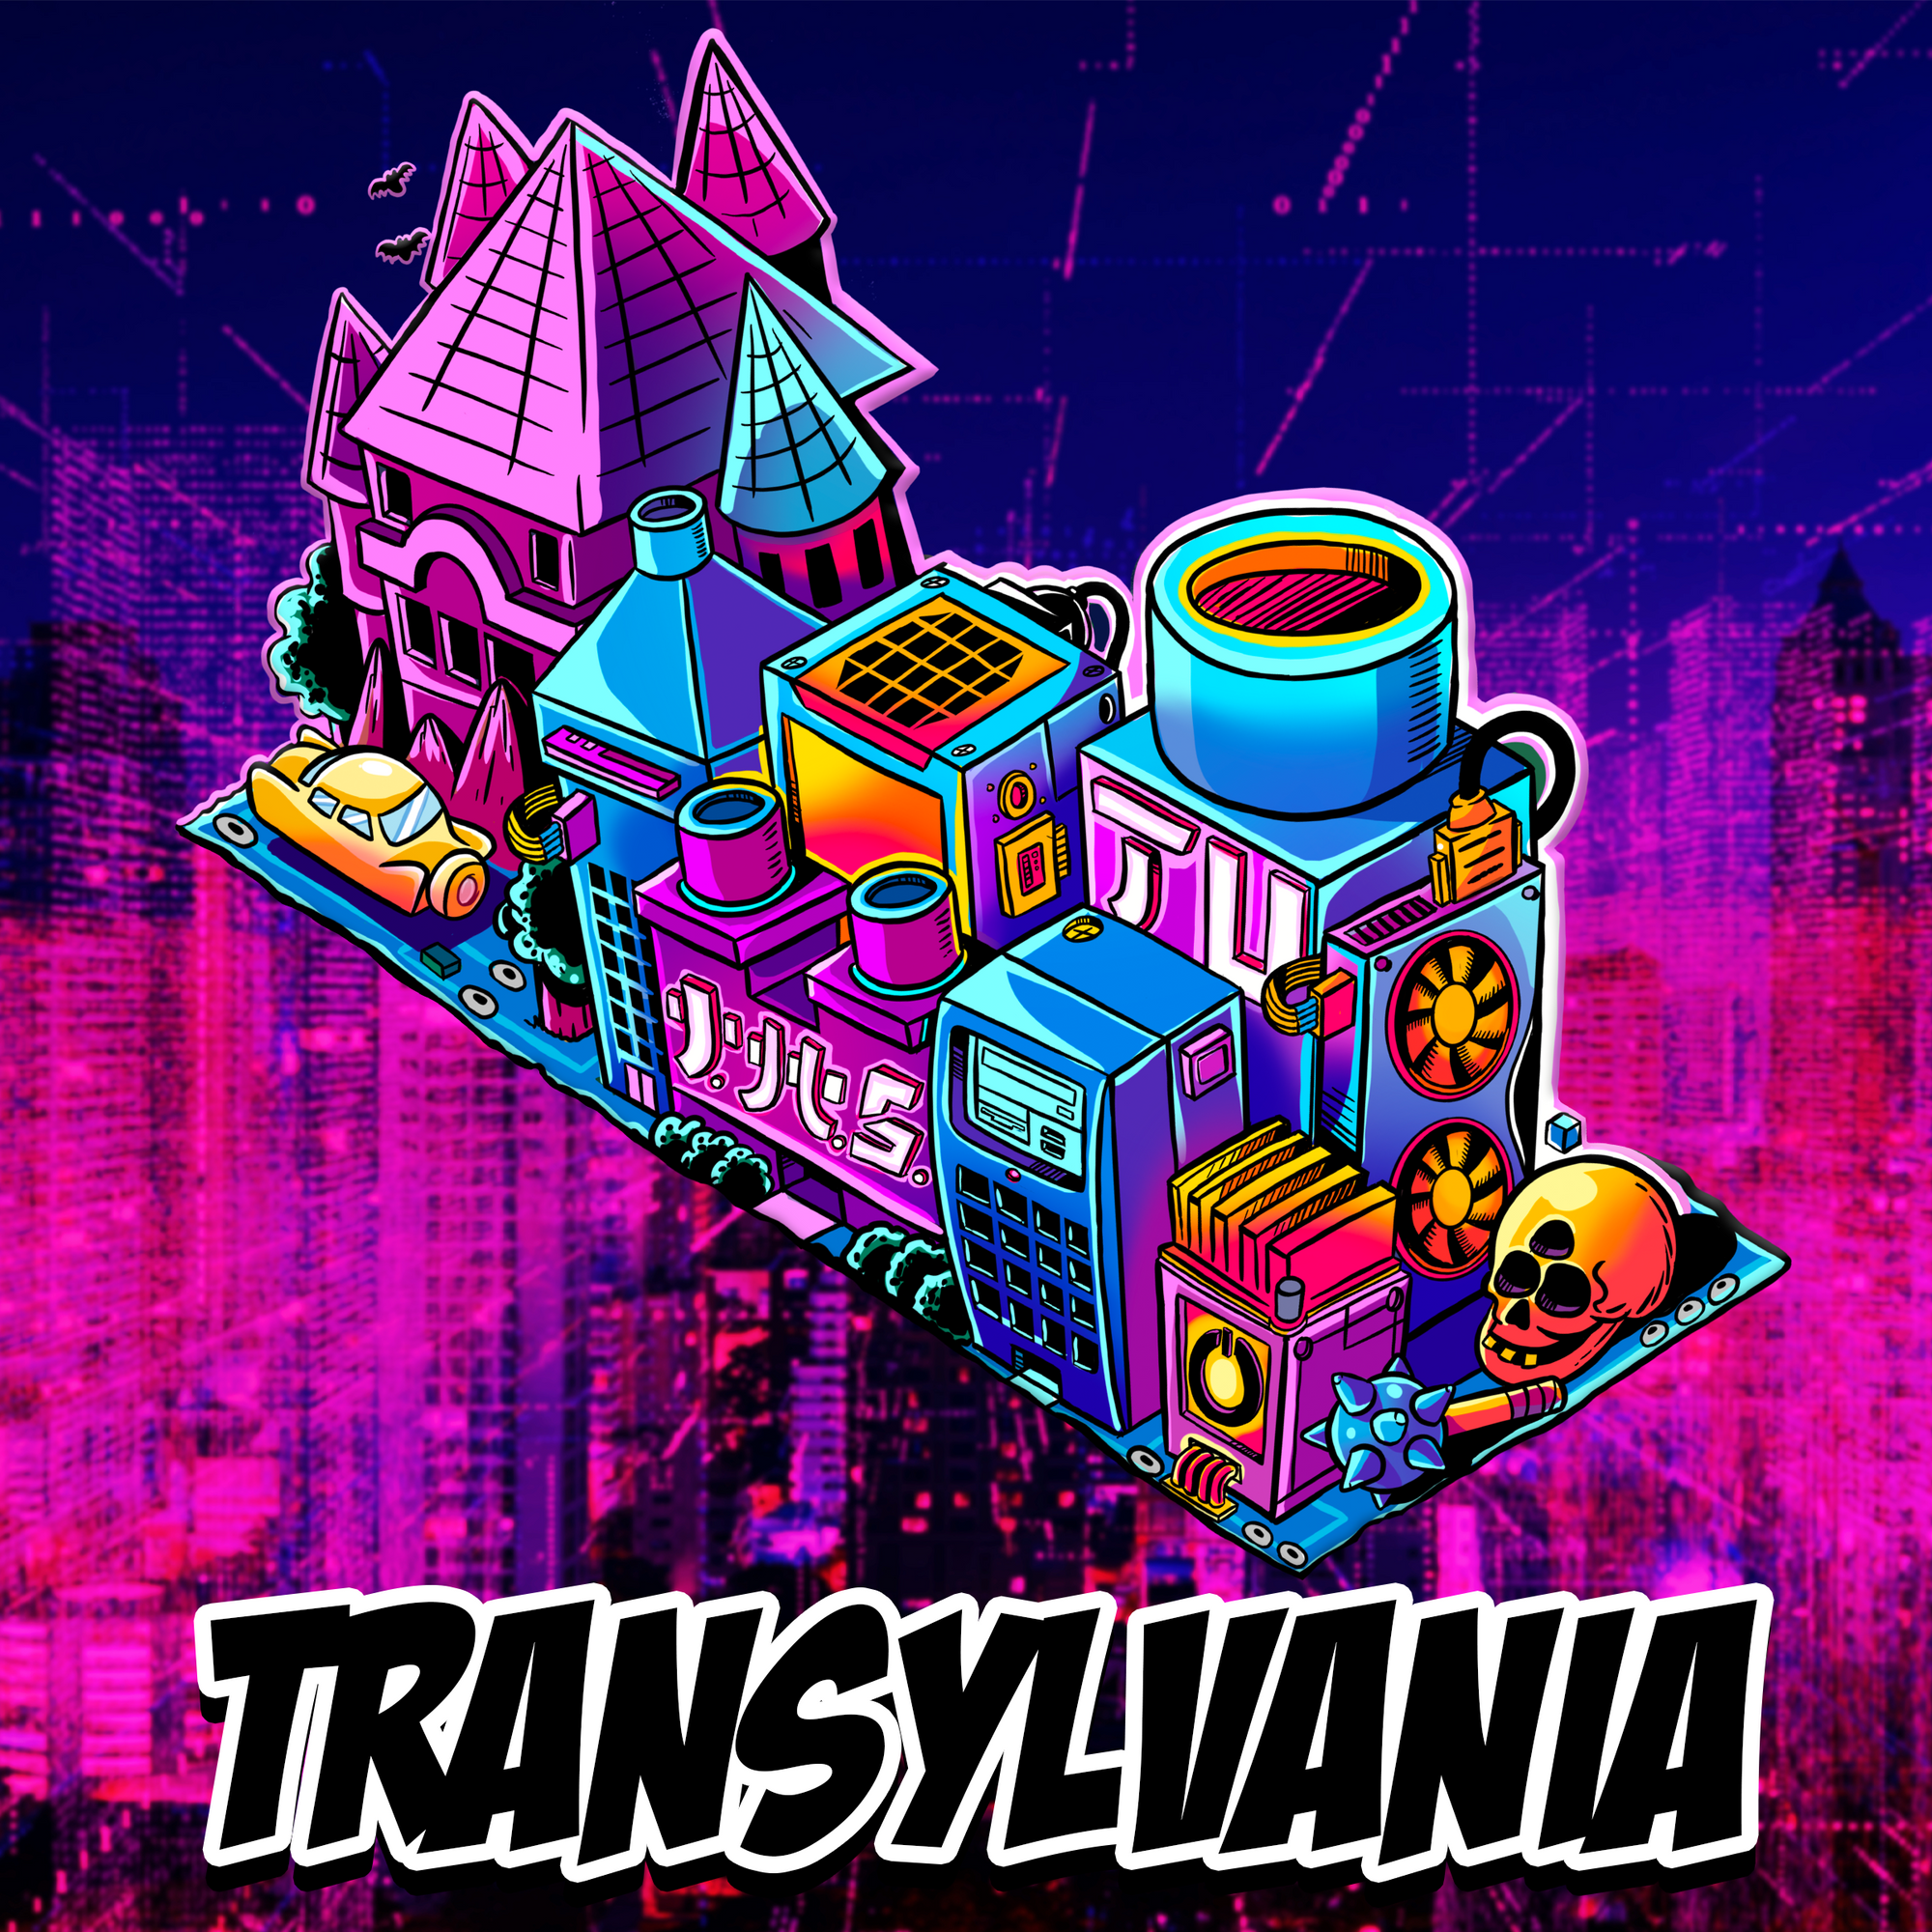 Transylvania in Smashcraft's Planet Future Zero, a busy city home to Dracula Jr. and Frankenstein